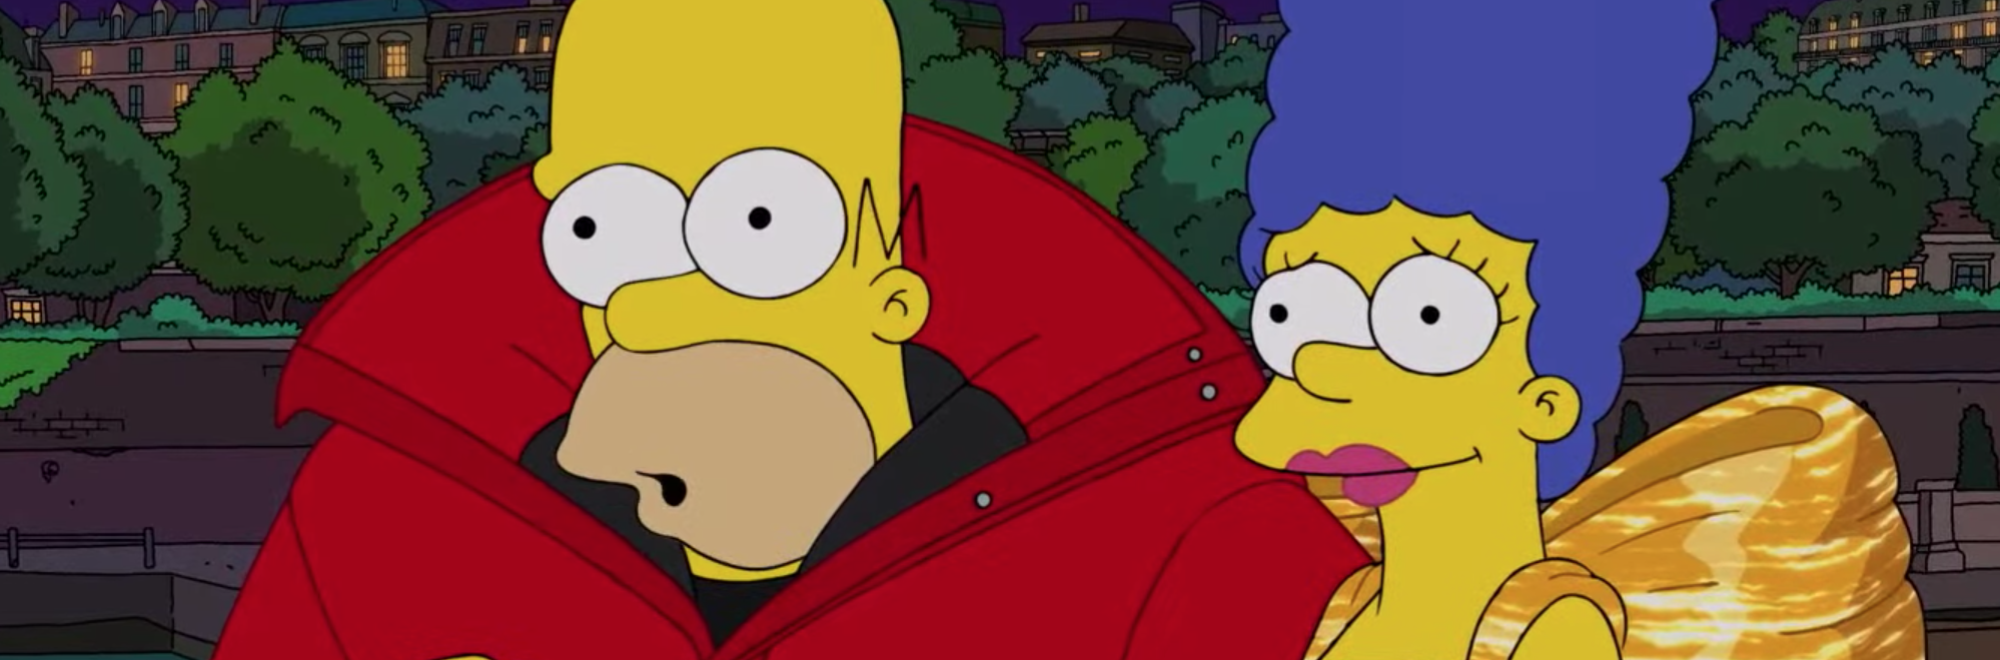 Balenciaga teams up with The Simpsons to create scroll-stopping content